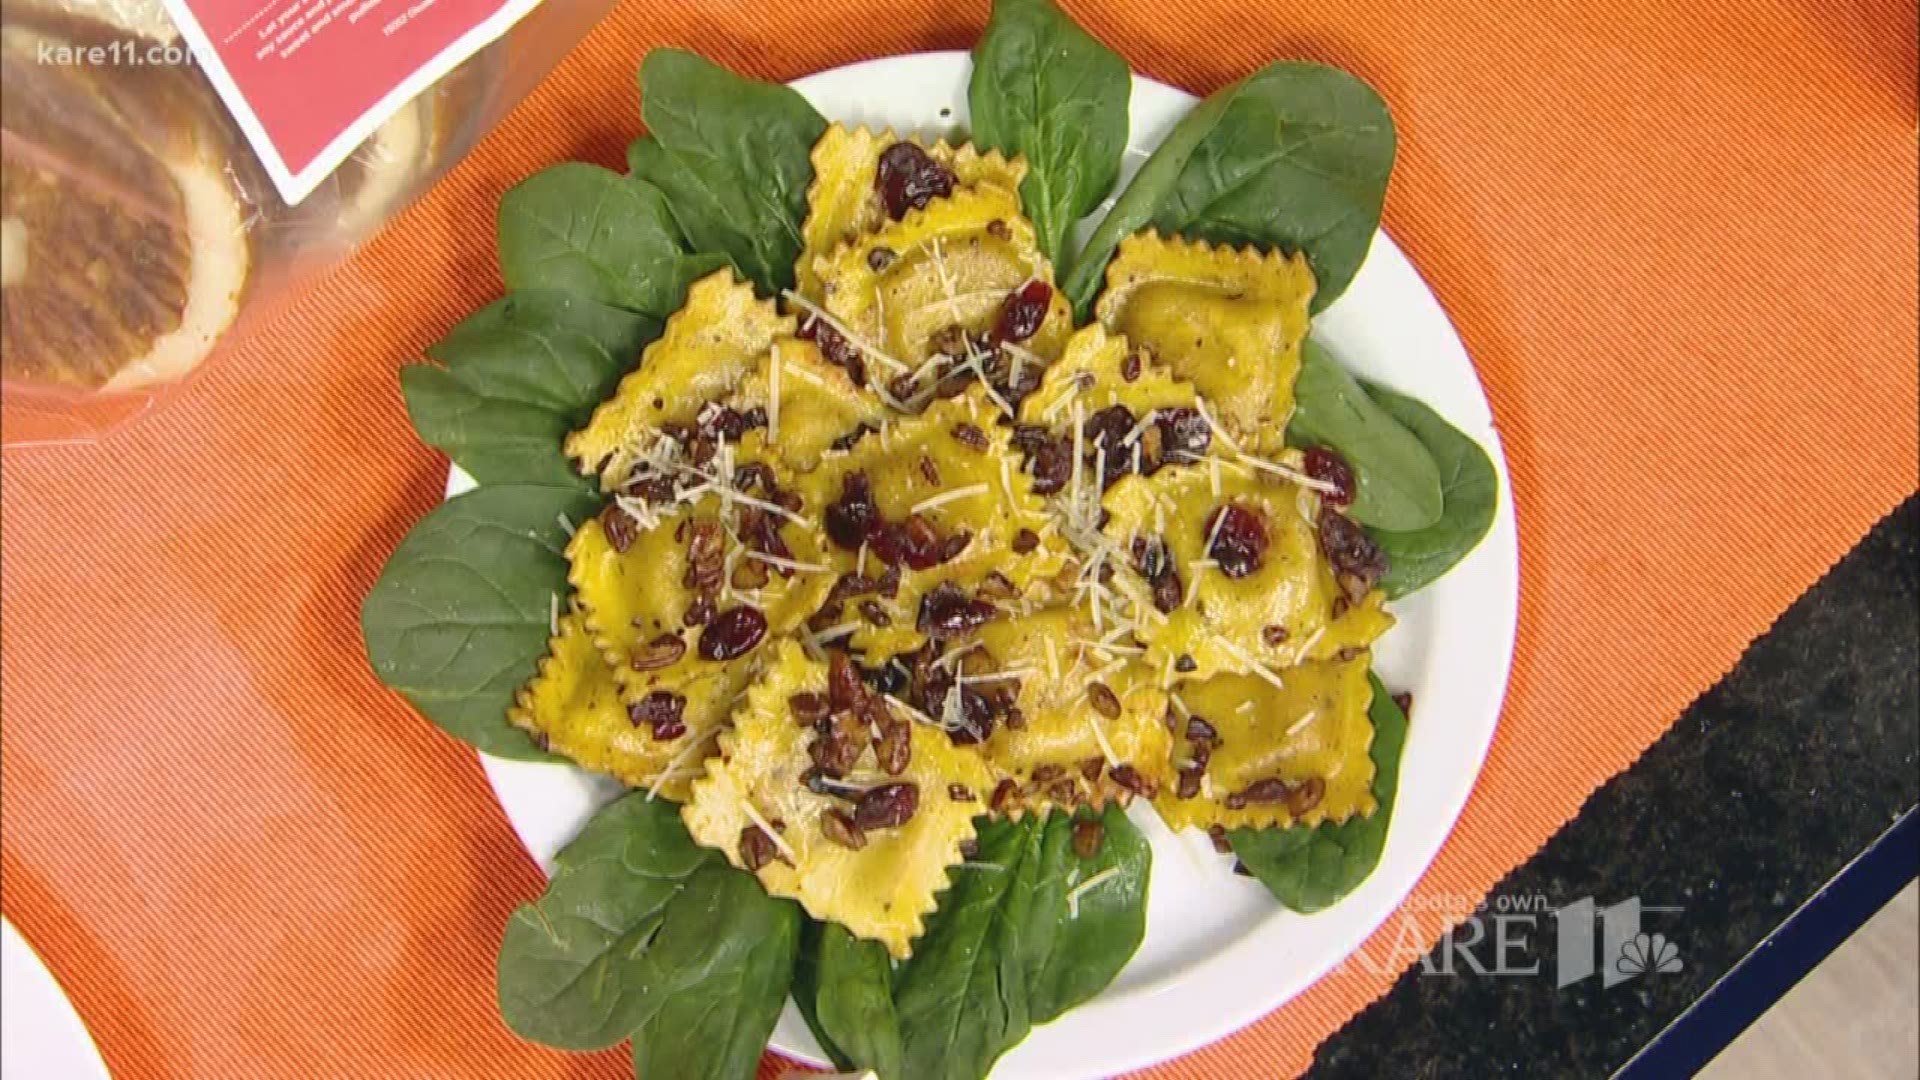 Darcy Olson with Let's Dish cooks up ravioli, pulled pork and a rice dish.